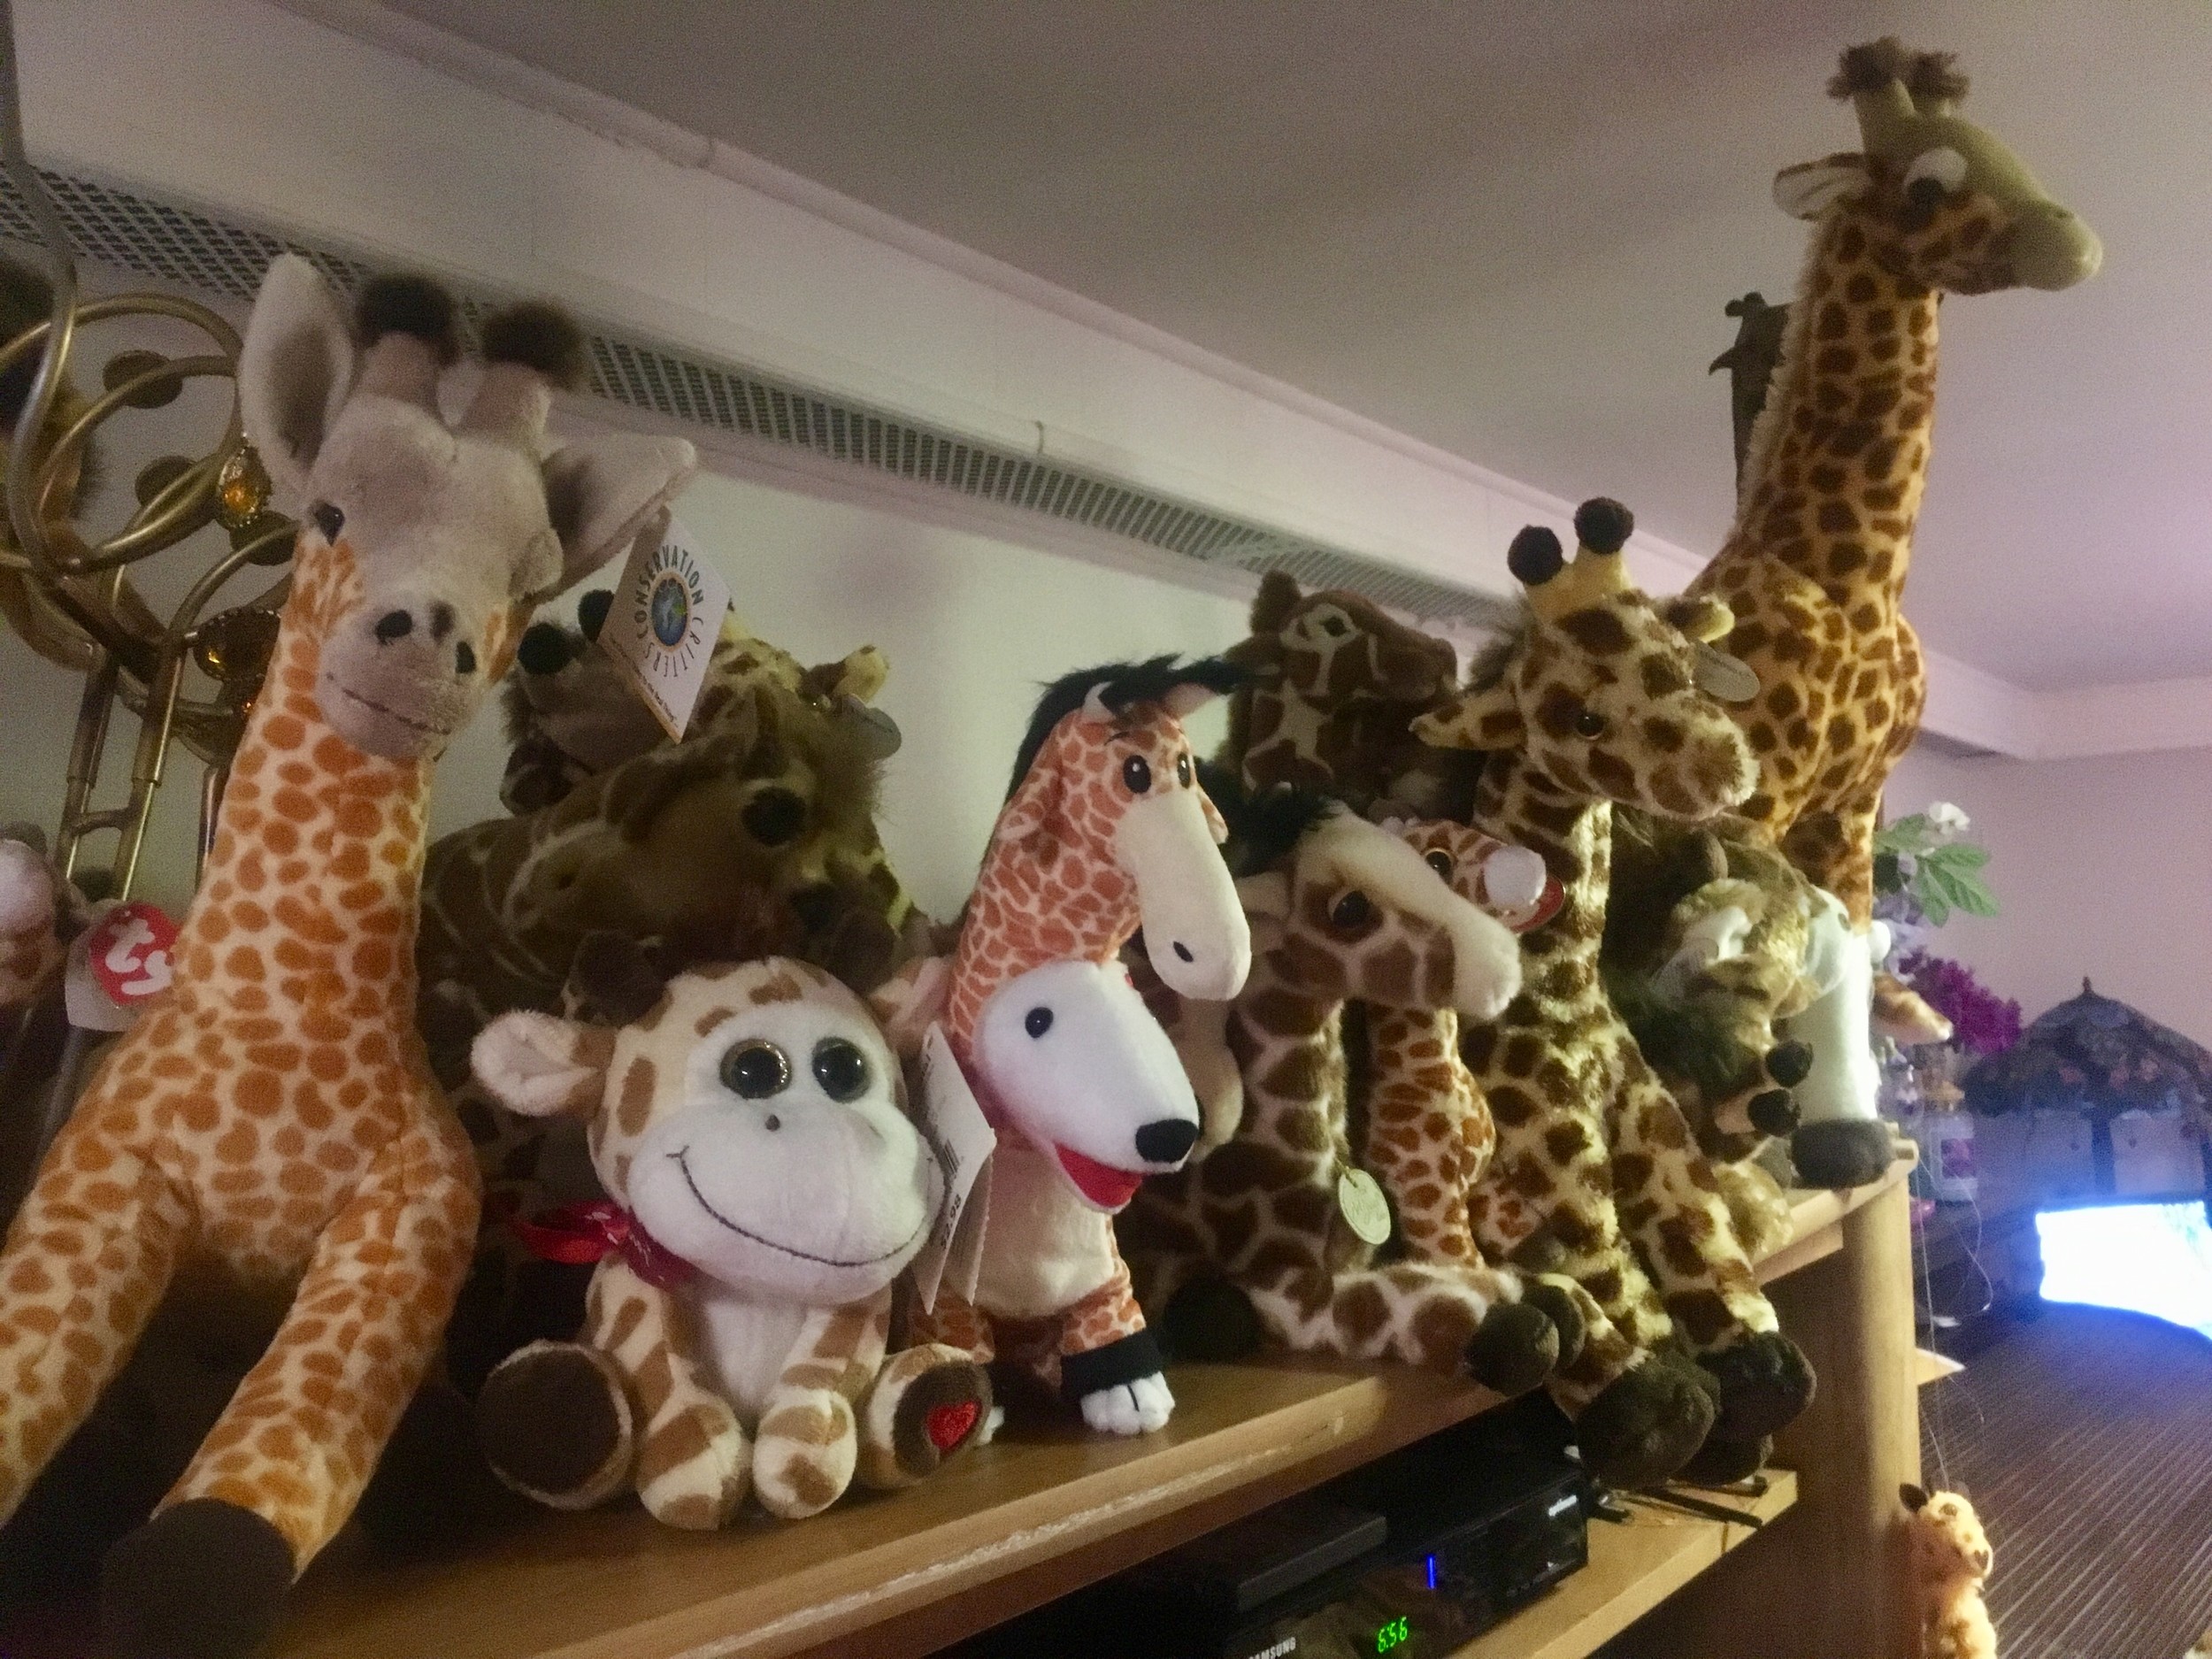 Giraffes are organized thematically on shelves throughout the Susman family home.